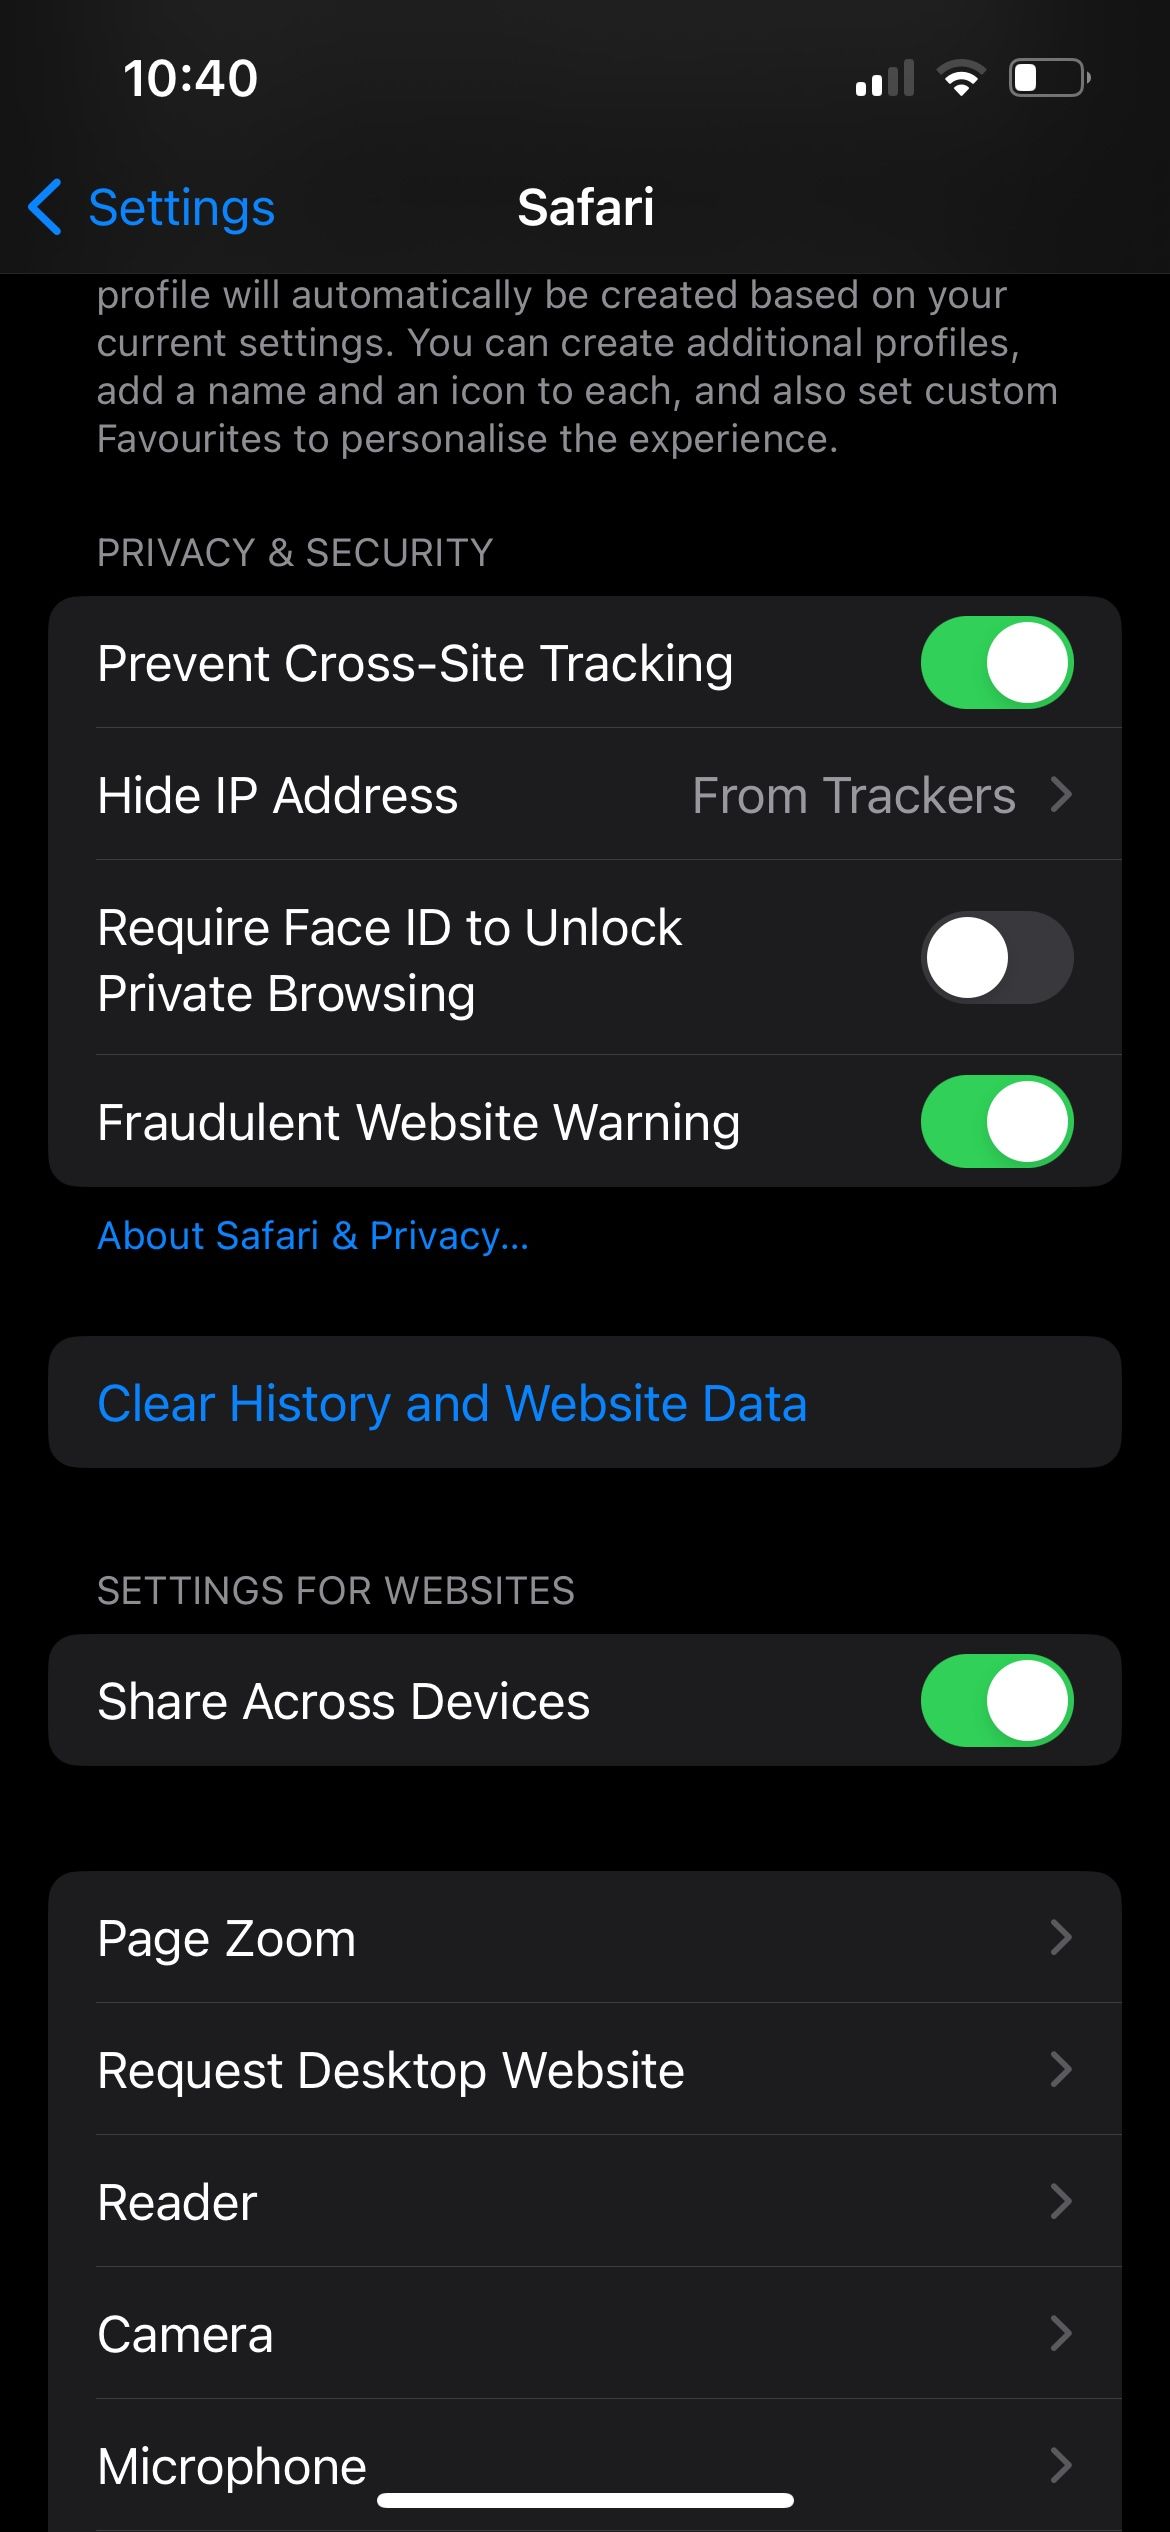 Safari's settings page Privacy & Security section